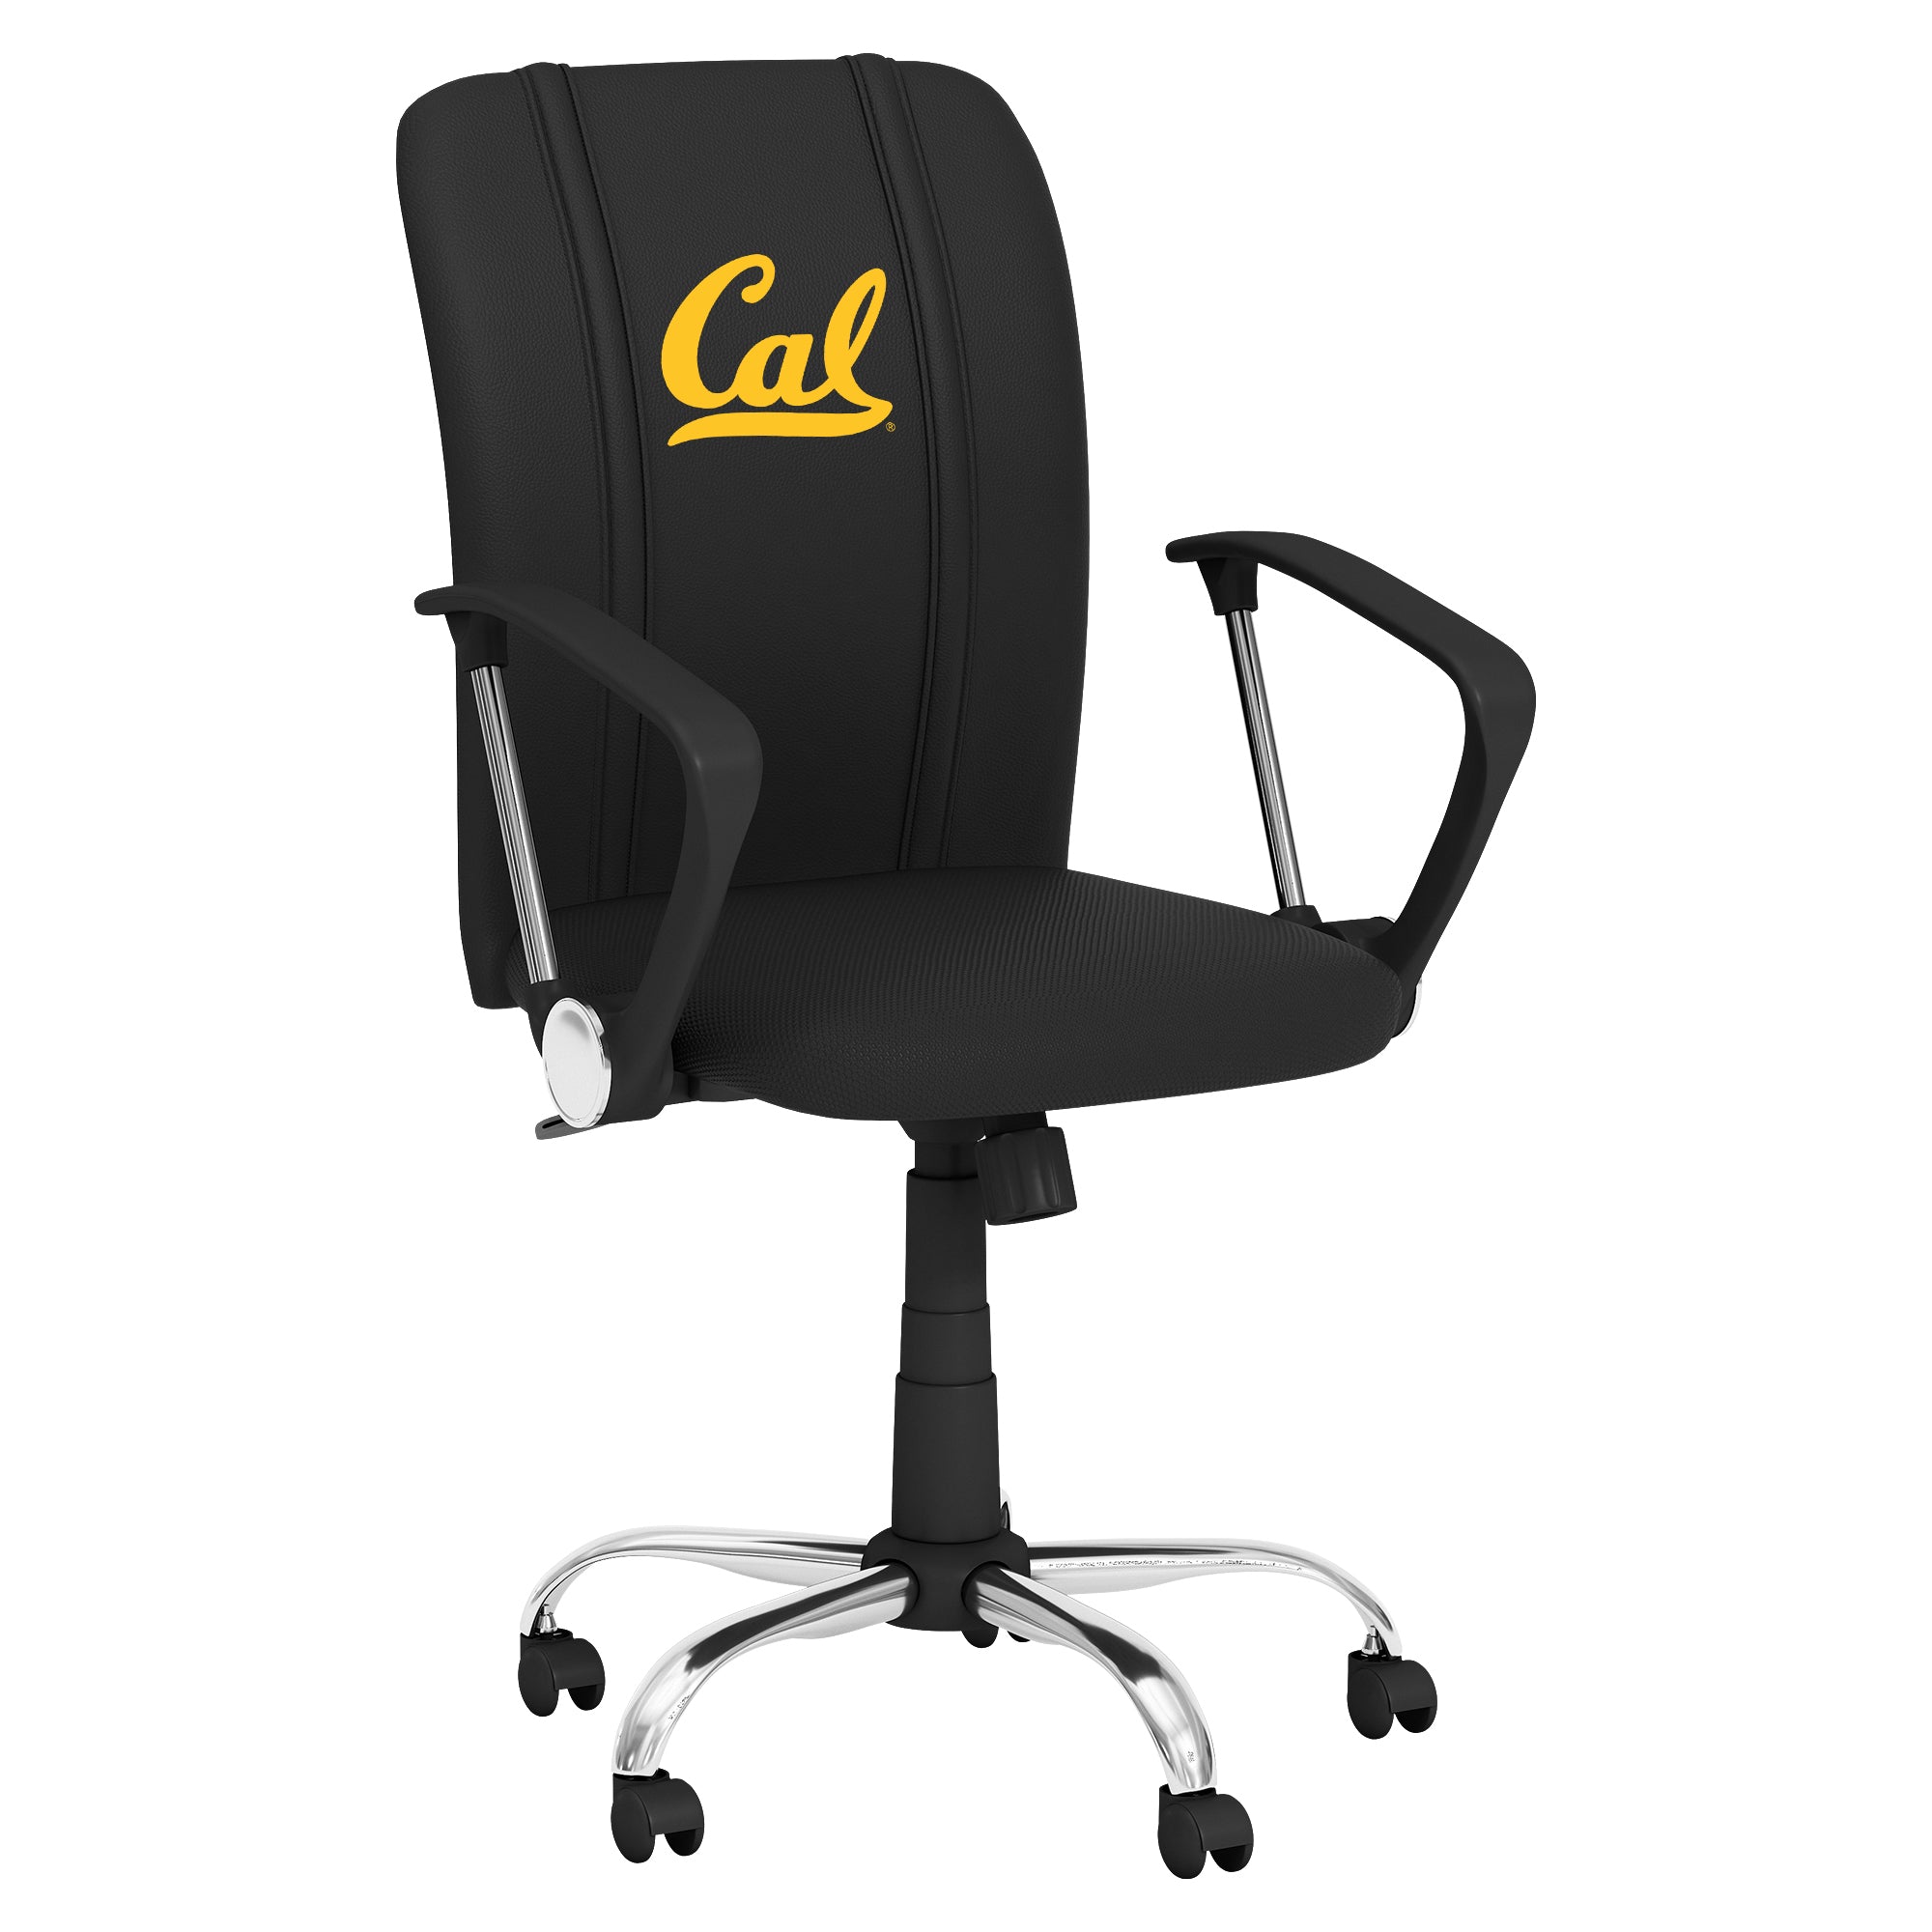 California Golden Bears Curve Task Chair with California Golden Bears Logo